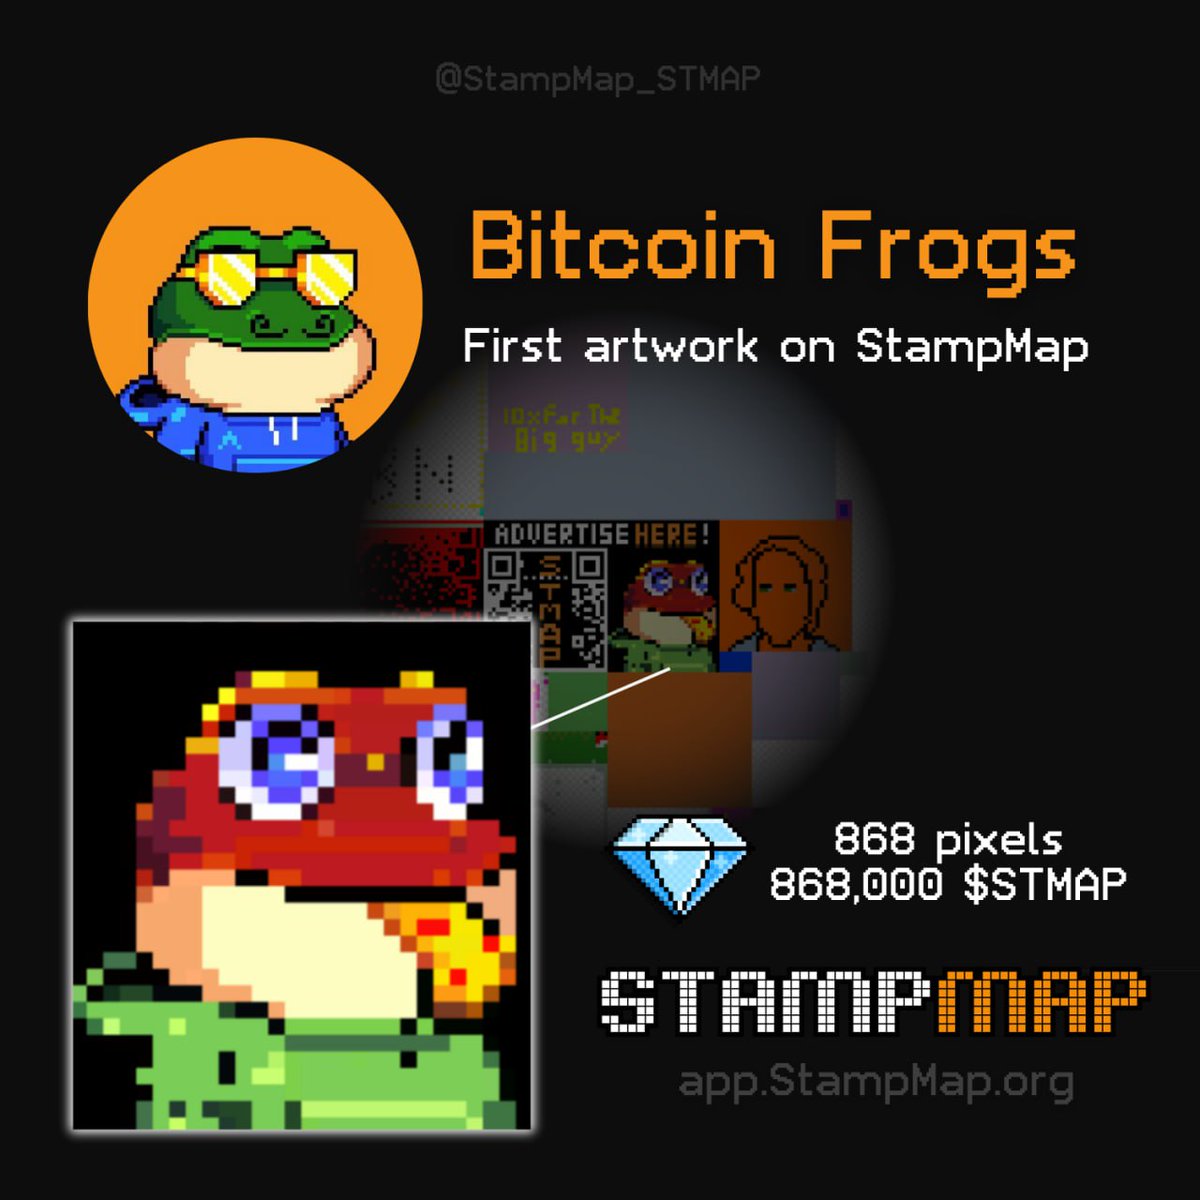 𝗙𝗶𝗿𝘀𝘁 𝗮𝗿𝘁𝘄𝗼𝗿𝗸 𝗼𝗻 𝗦𝘁𝗮𝗺𝗽𝗠𝗮𝗽 ! ▶️ @BitcoinFrogs 🐸 - Ordinal collection Dear StampMappers, You may have noticed that the first creation on #StampMap made for the launch was a Bitcoin Frog ! Indeed, the initiators of StampMap chose this ordinal collection